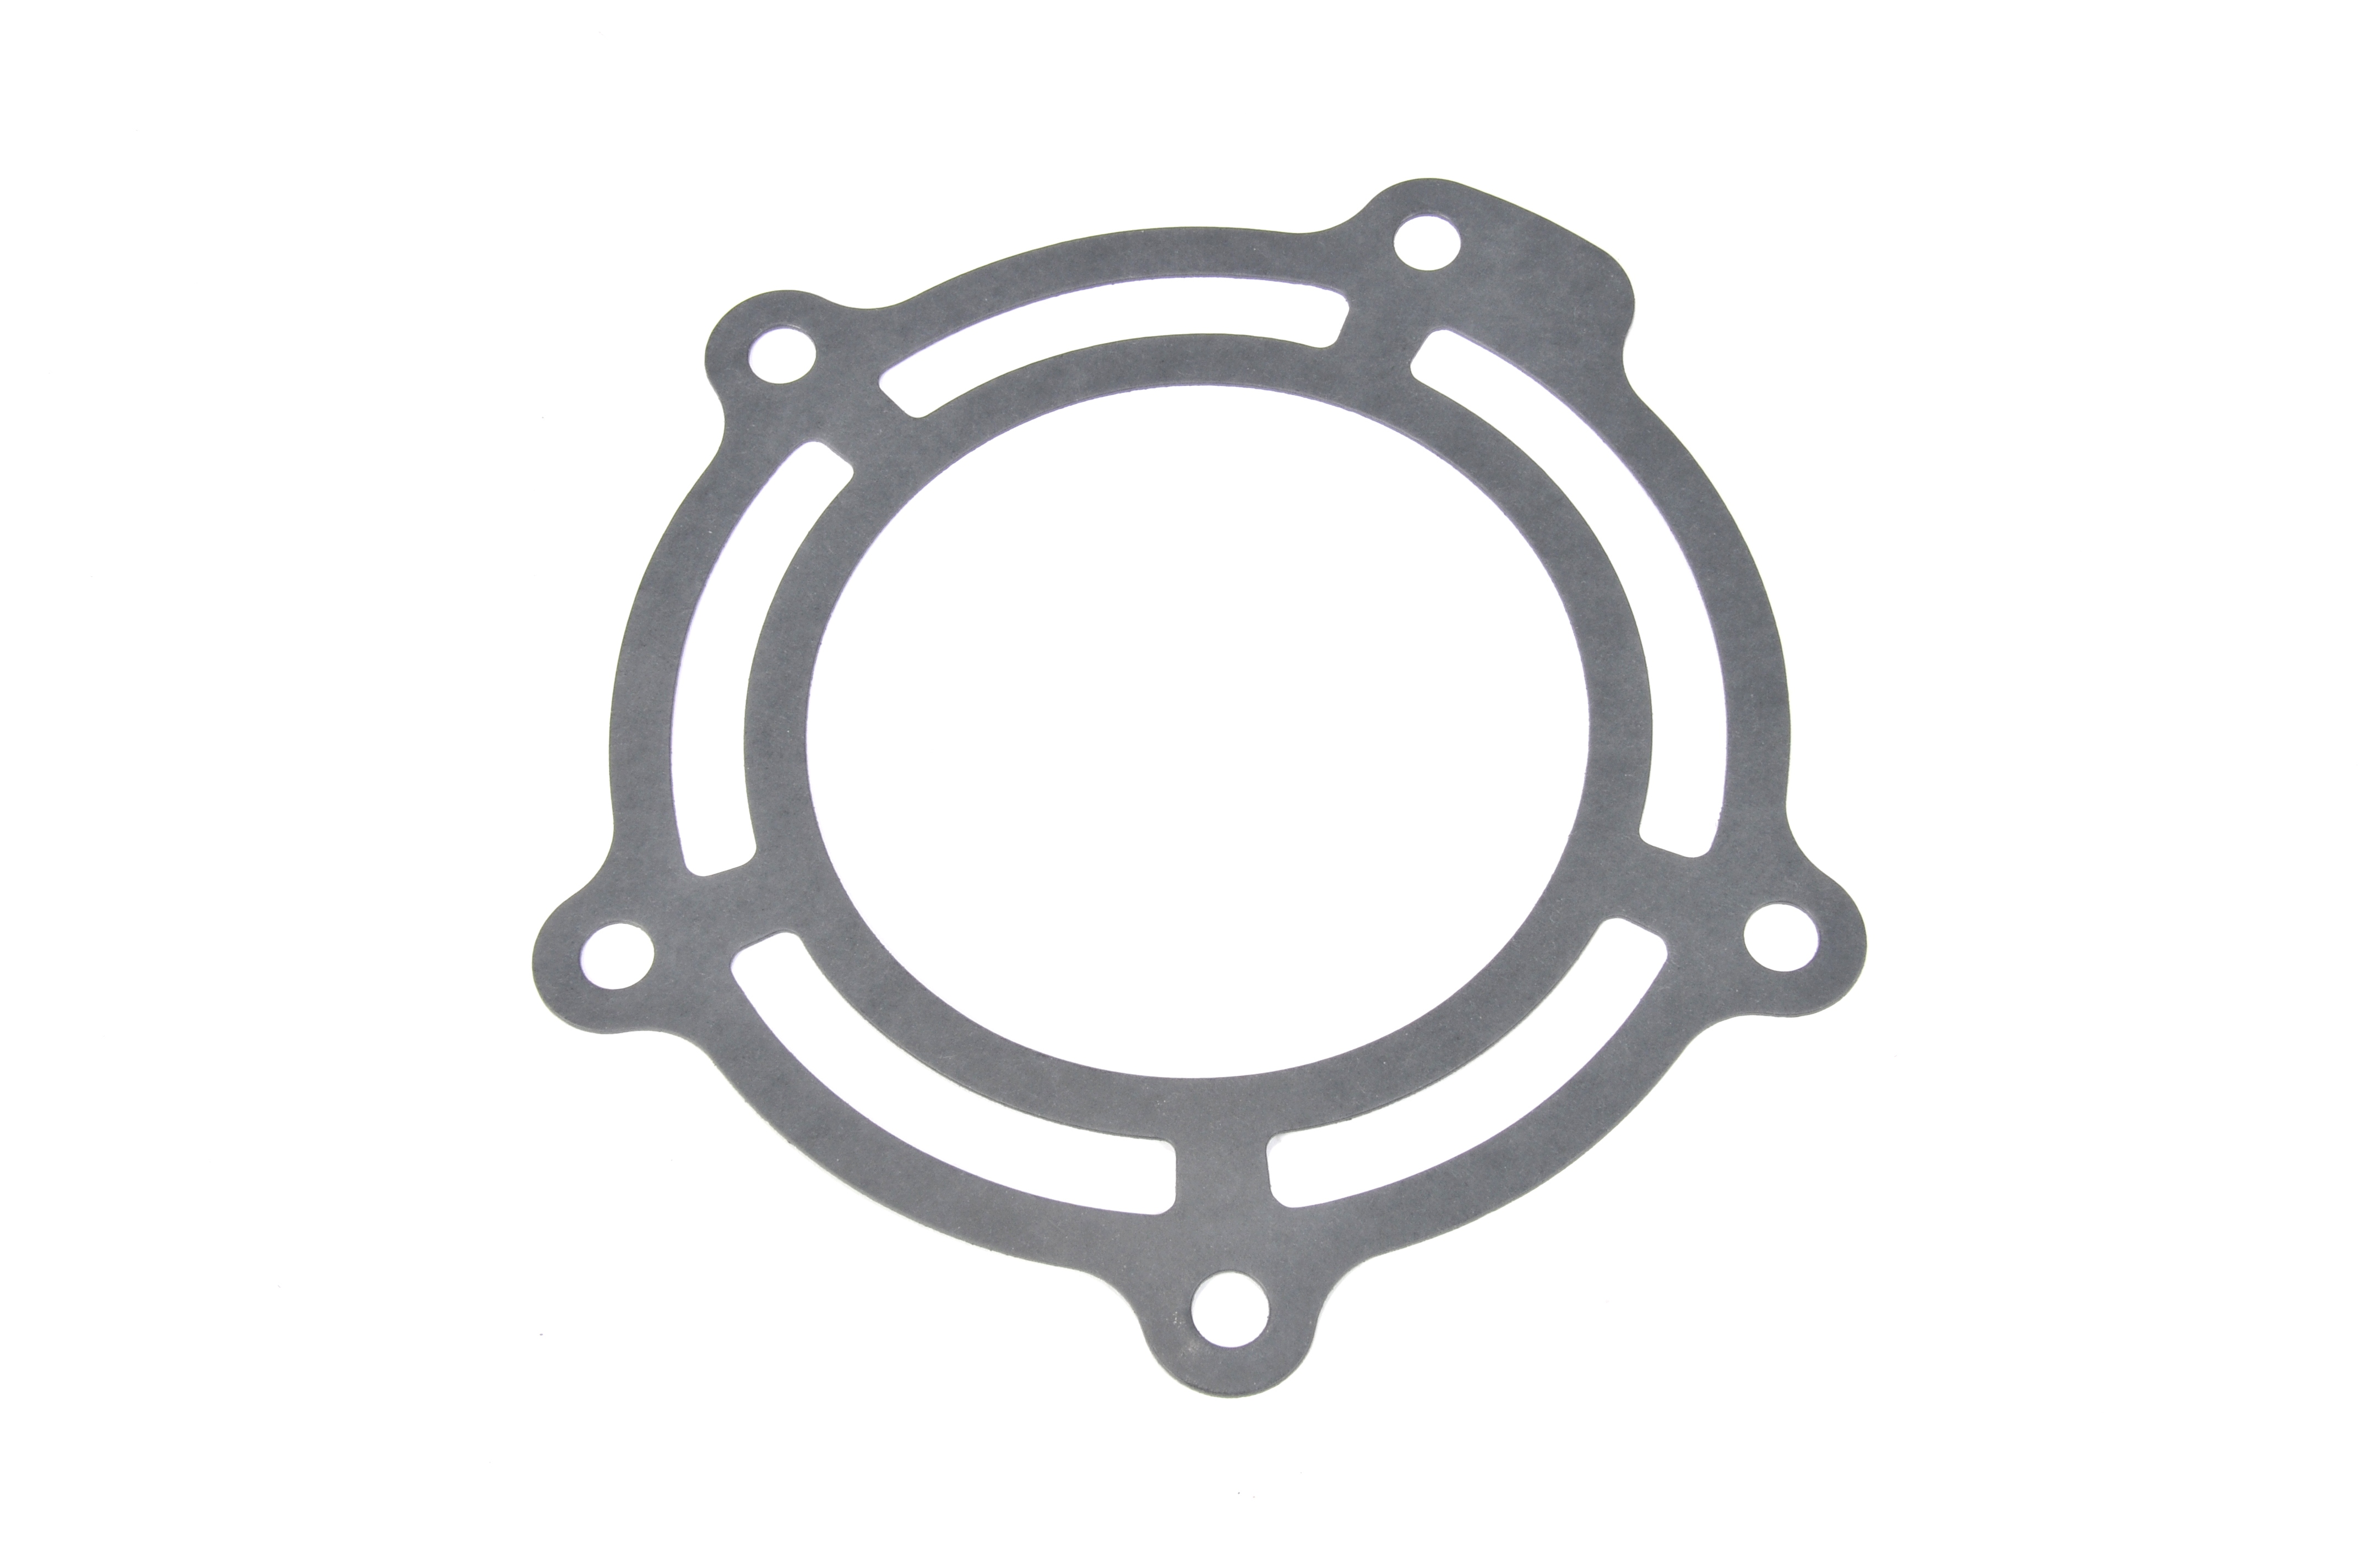 GM GENUINE PARTS - Transfer Case Adapter Gasket - GMP 15642511